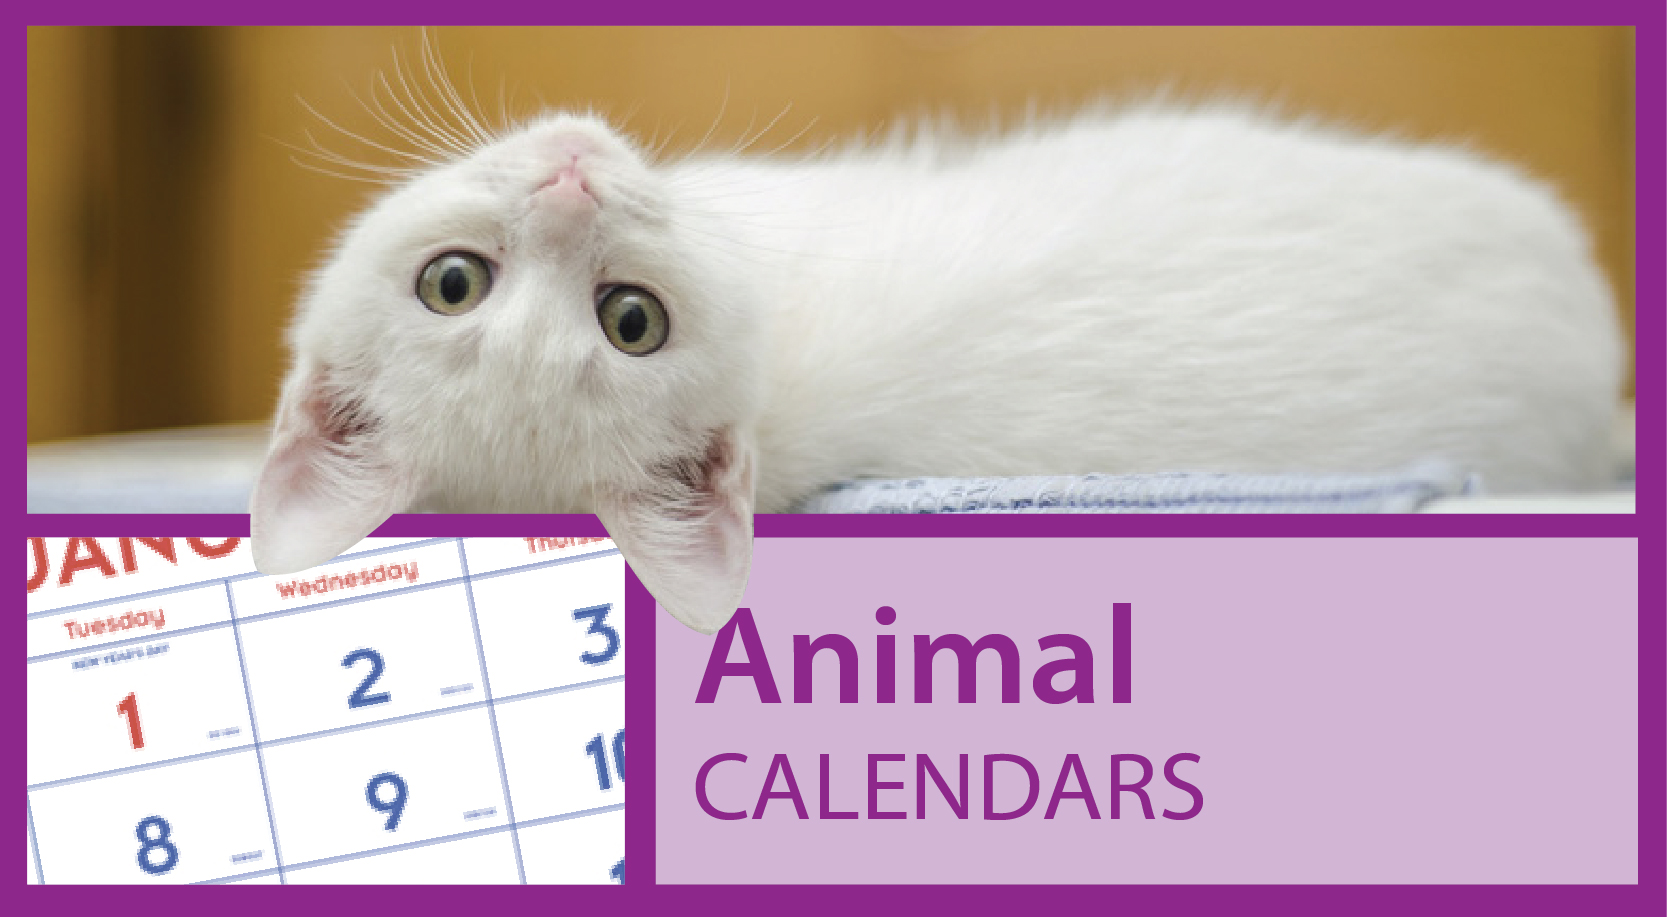 Promotional Animal Calendars https://www.valuecalendars.com/products/standard_imprinted_calendars/promotional_animal_calendars